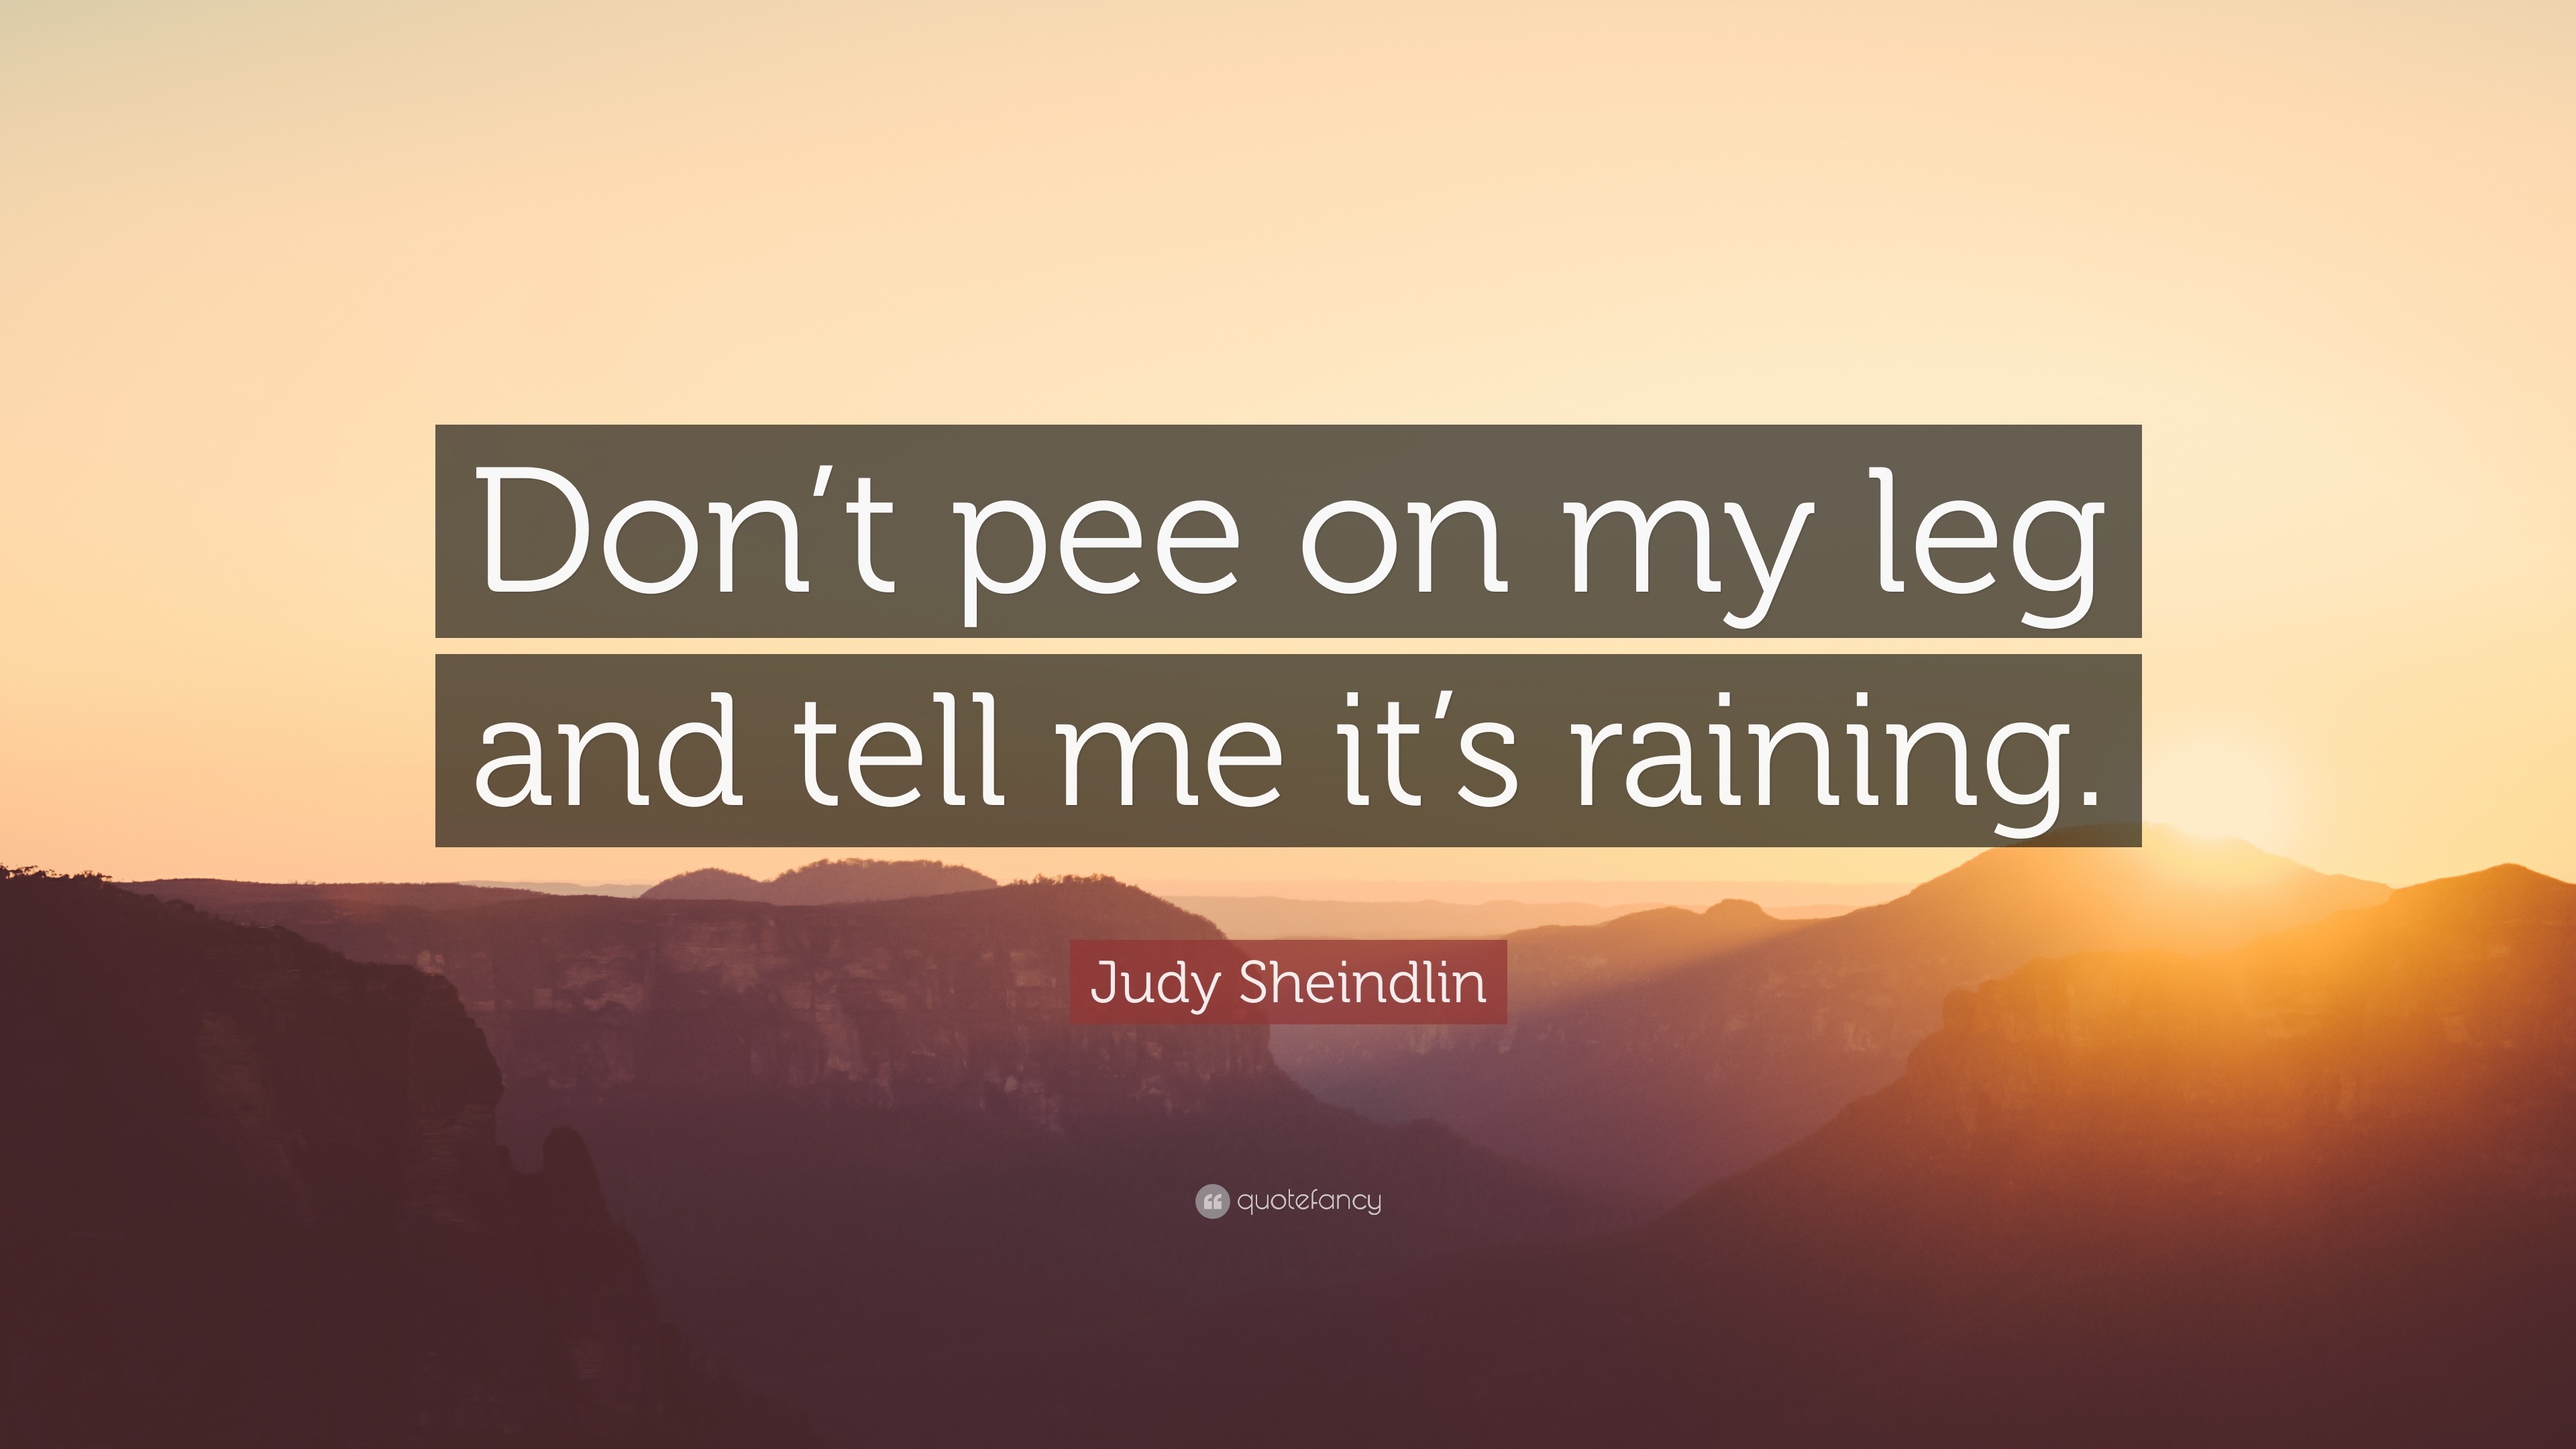 Image result for don't pee on my leg and tell me it's raining